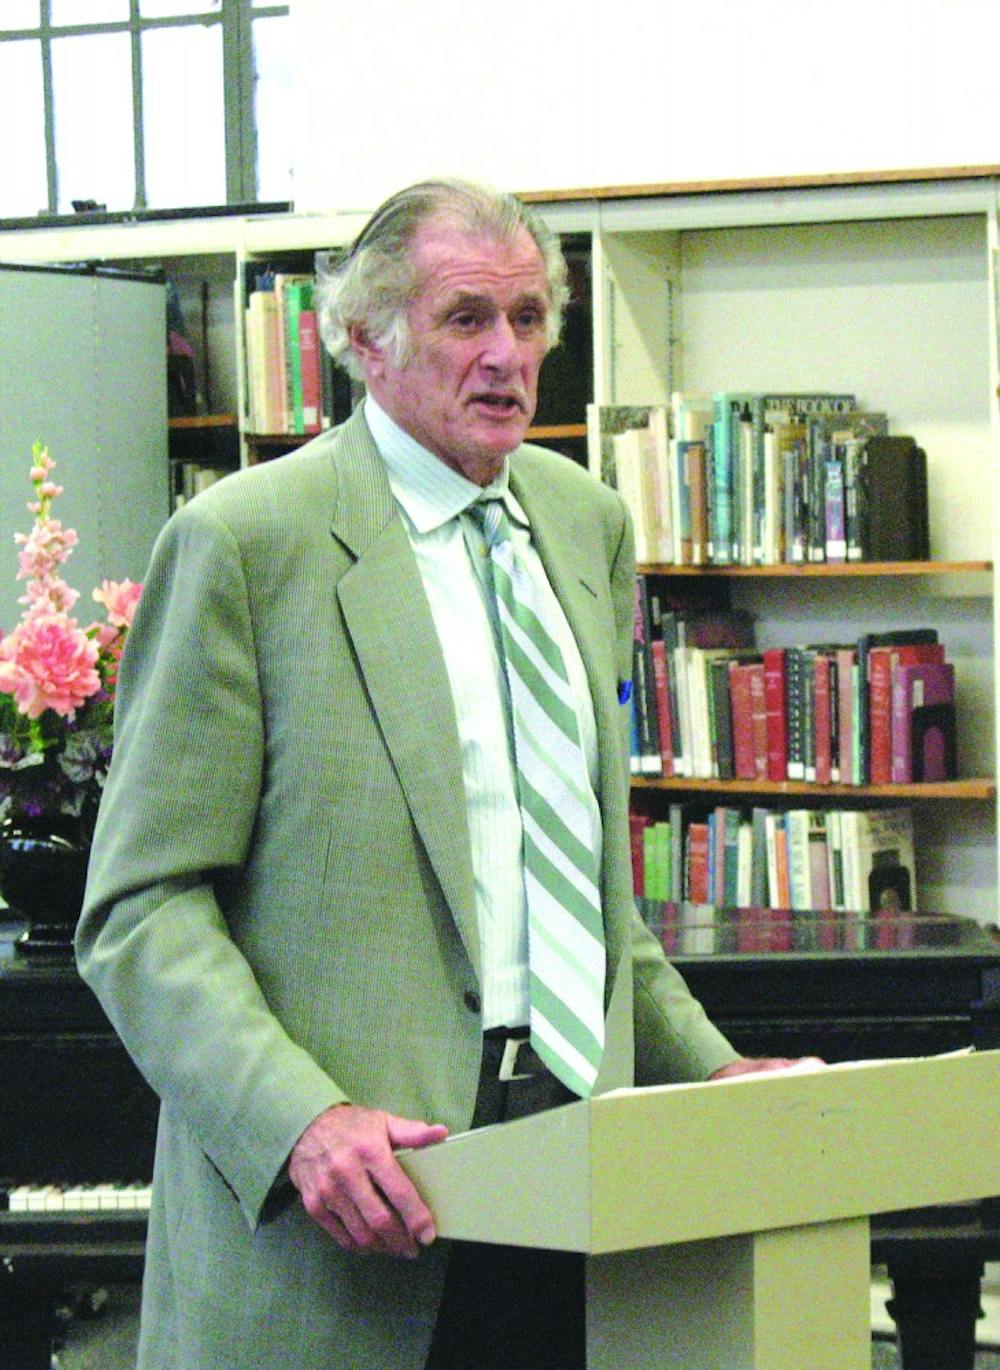 	Sports Illustrated’s Frank Deford is a living legend in the field of journalism and has been called “the world’s greatest living sportswriter” by GQ. He recently became the first sportswriter to win the National Press Foundation’s W.M. Kiplinger Award for Distinguished Contributions to Journalism.